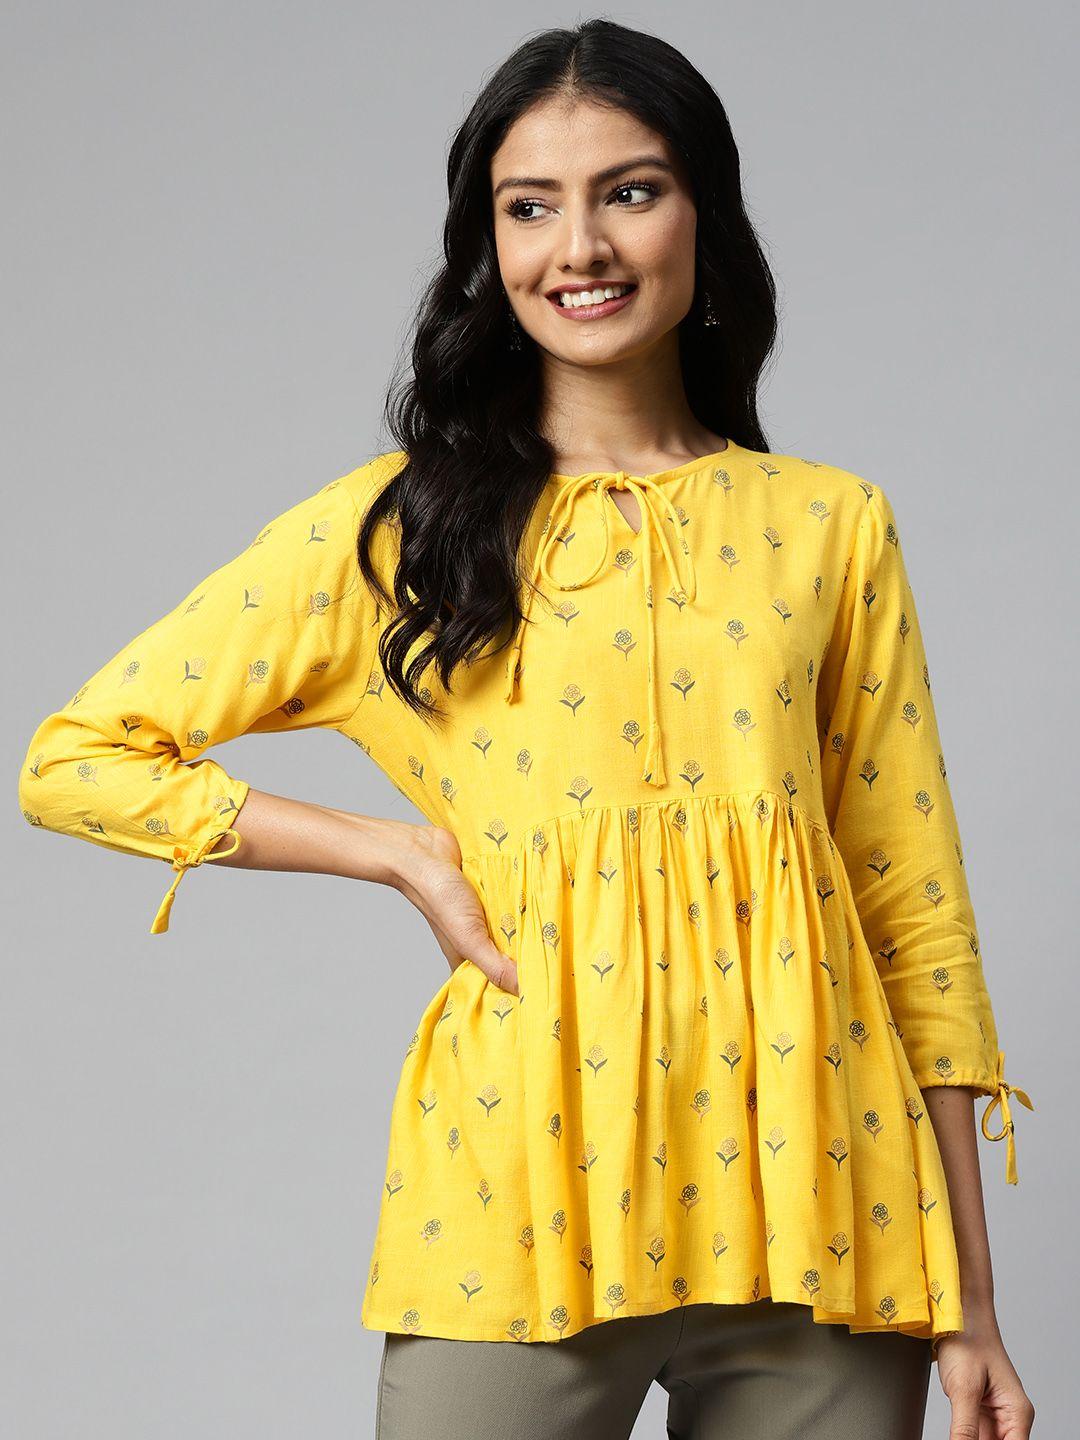 highlight-fashion-export-yellow-floral-print-tie-up-neck-empire-top